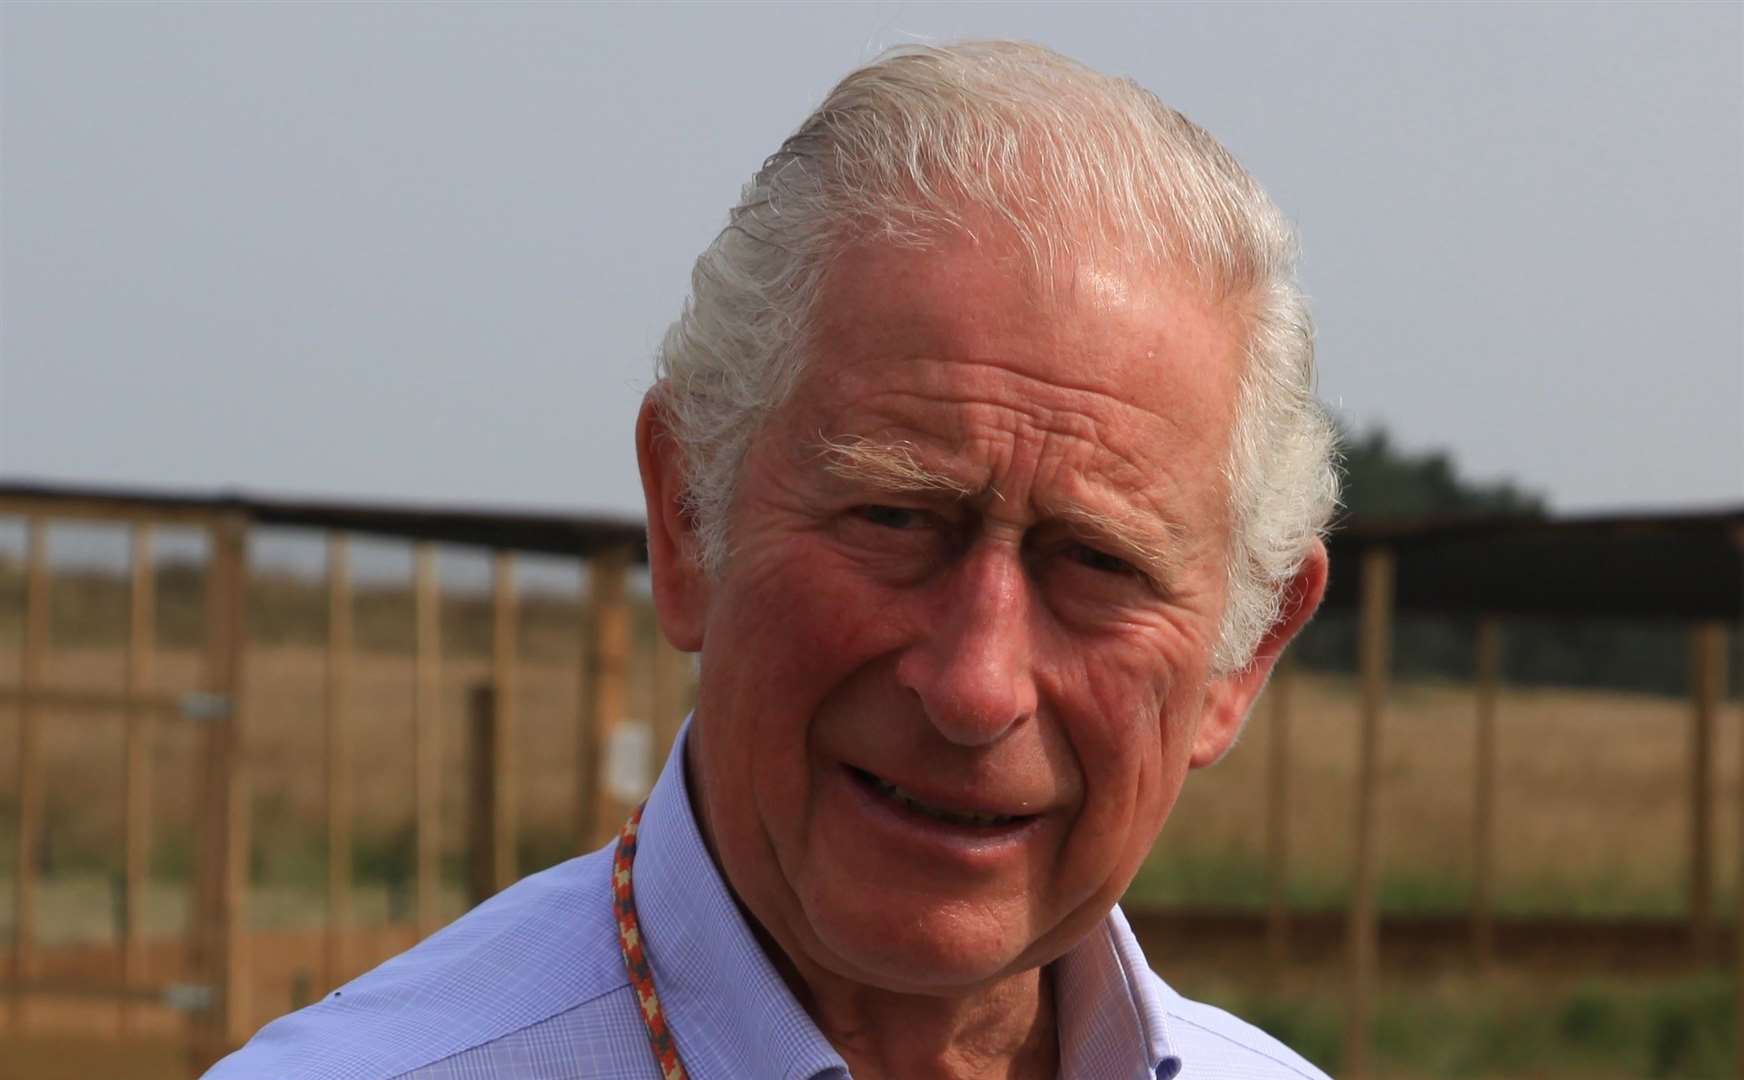 Prince Charles' estate owns the land in Faversham